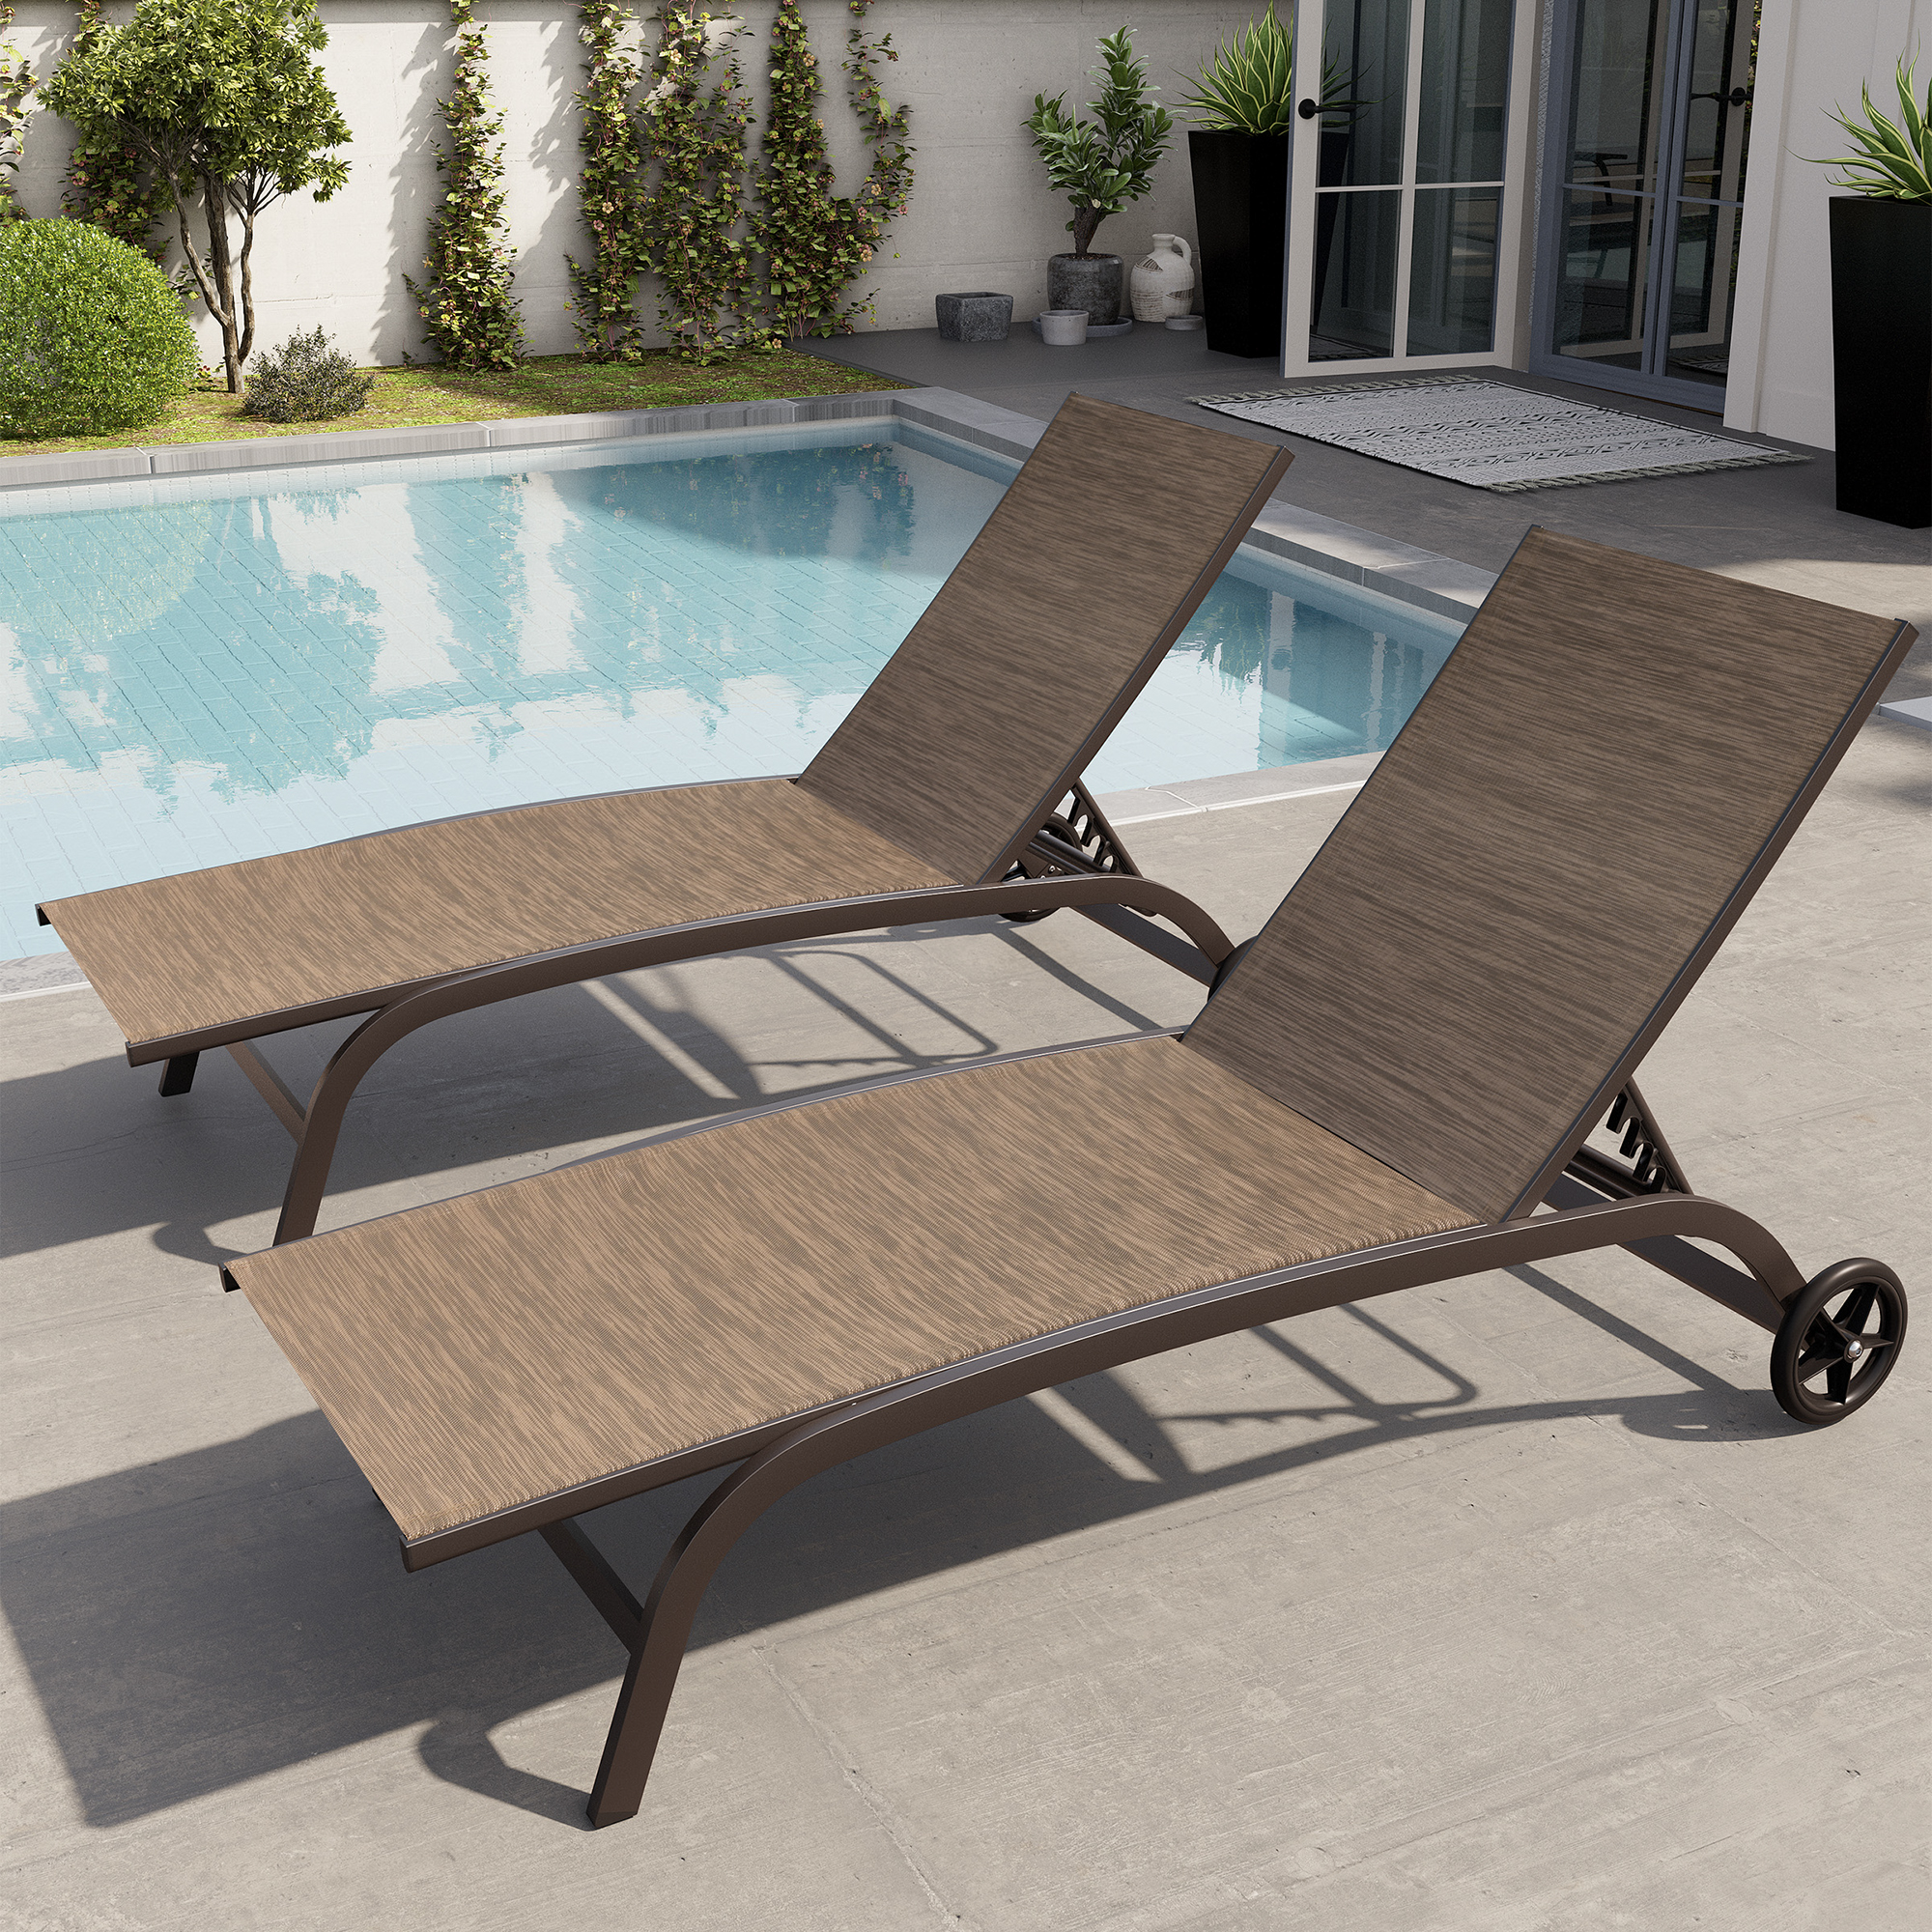 Crestlive Products Set of 2 Adjustable Aluminum Chaise Lounge Chairs & Wheels, Brown - image 3 of 8